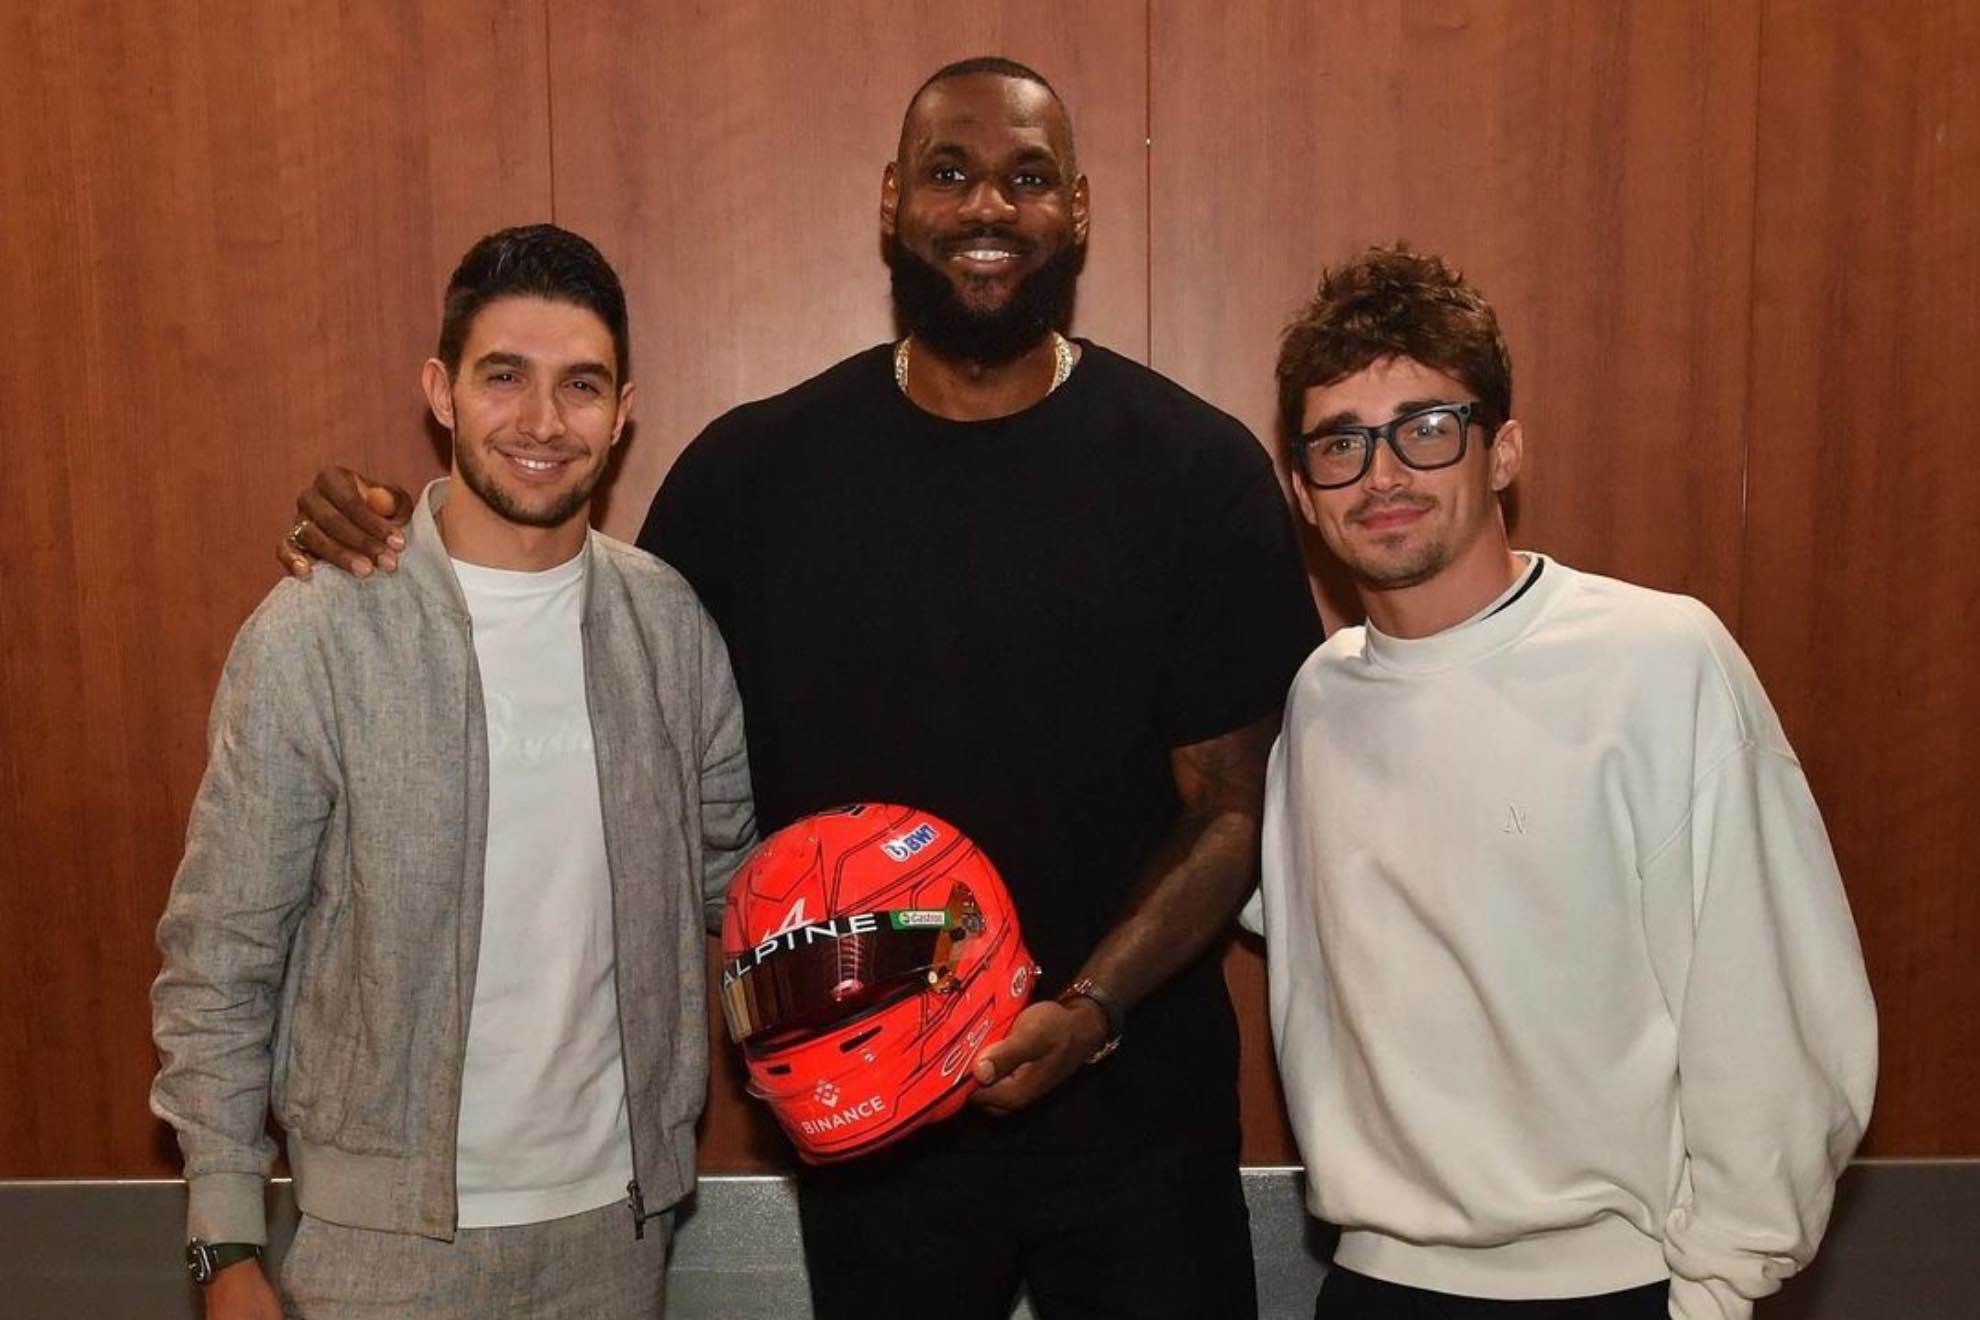 LeBron James met Formula 1 stars Charles Leclerc and Esteban Ocon and this was his hilarious reaction